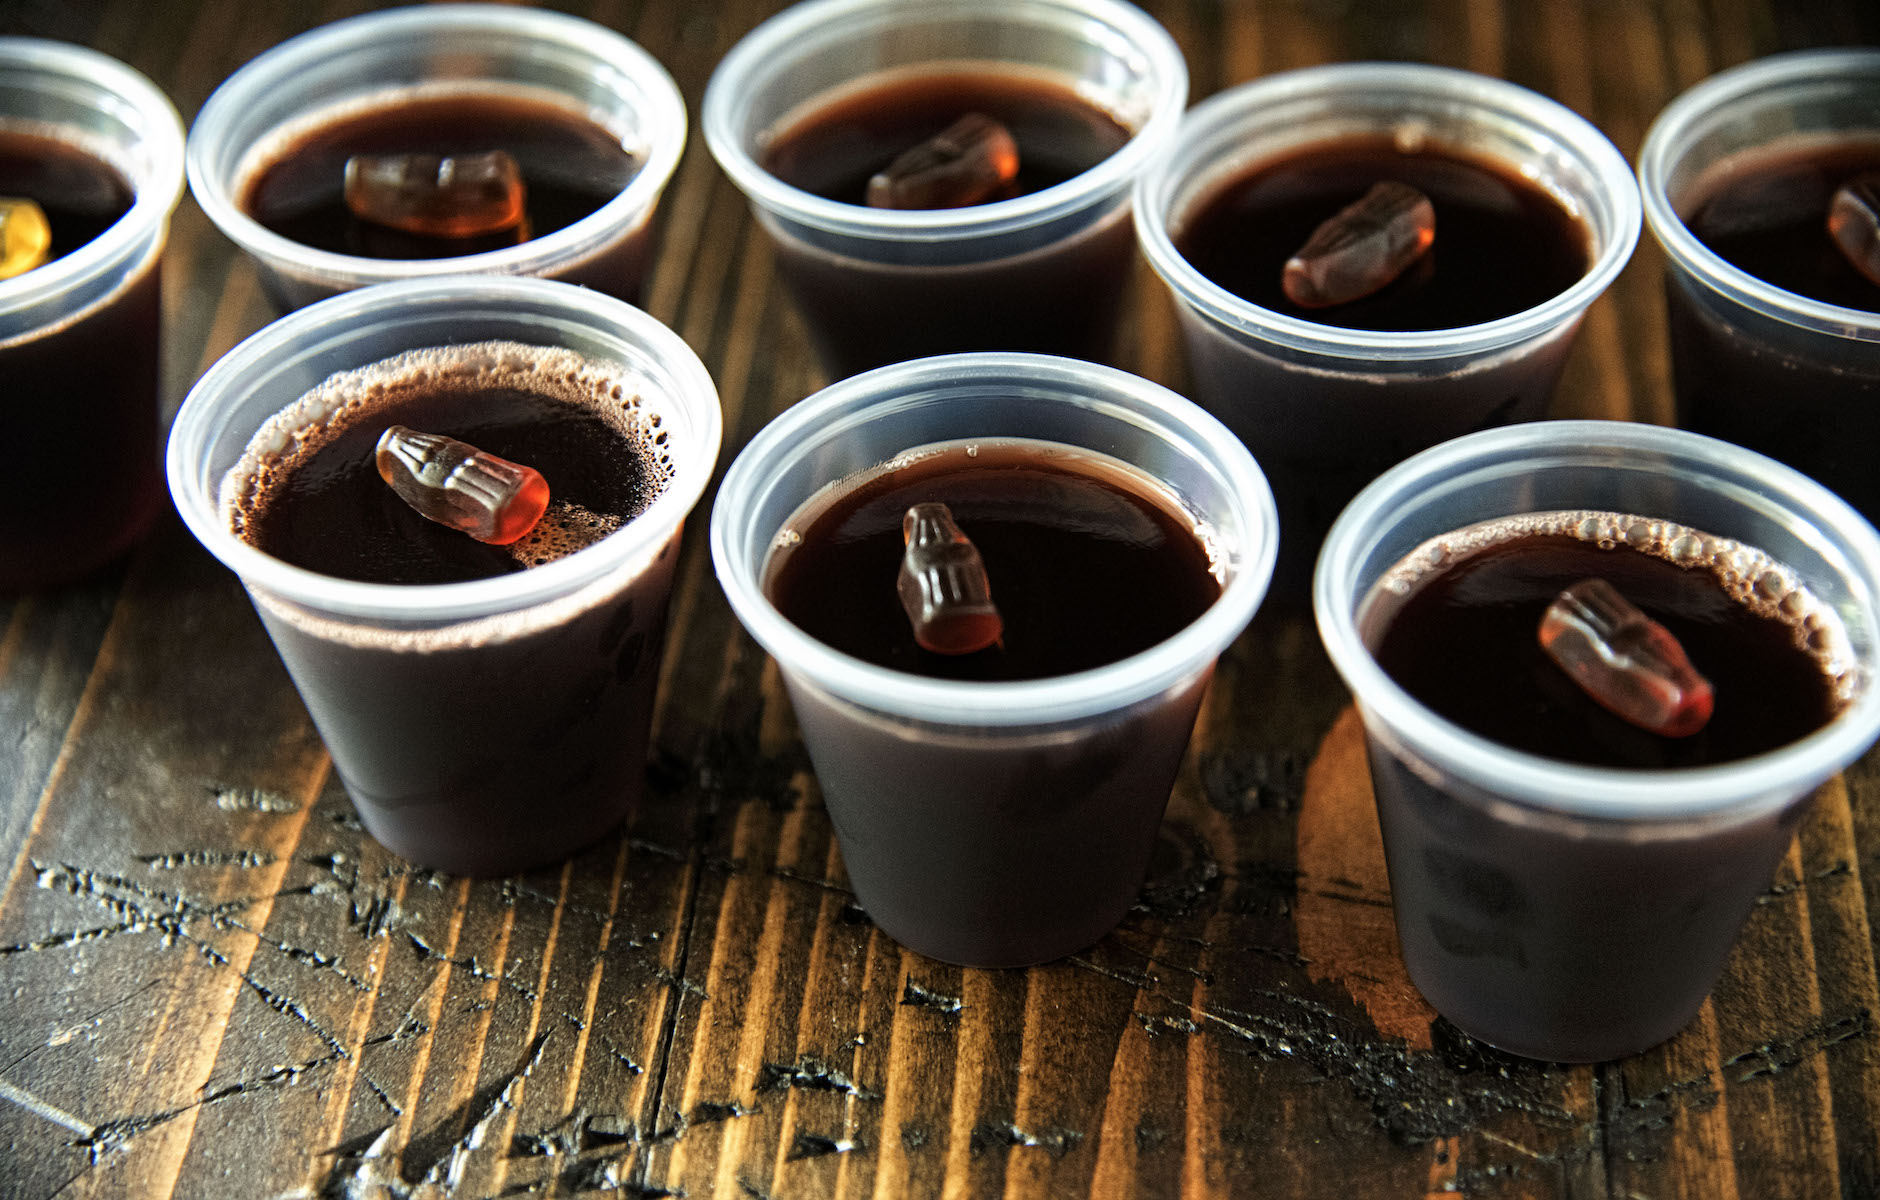 Black Cherry Spiced Rum and Coke Jell-O Shots in a row